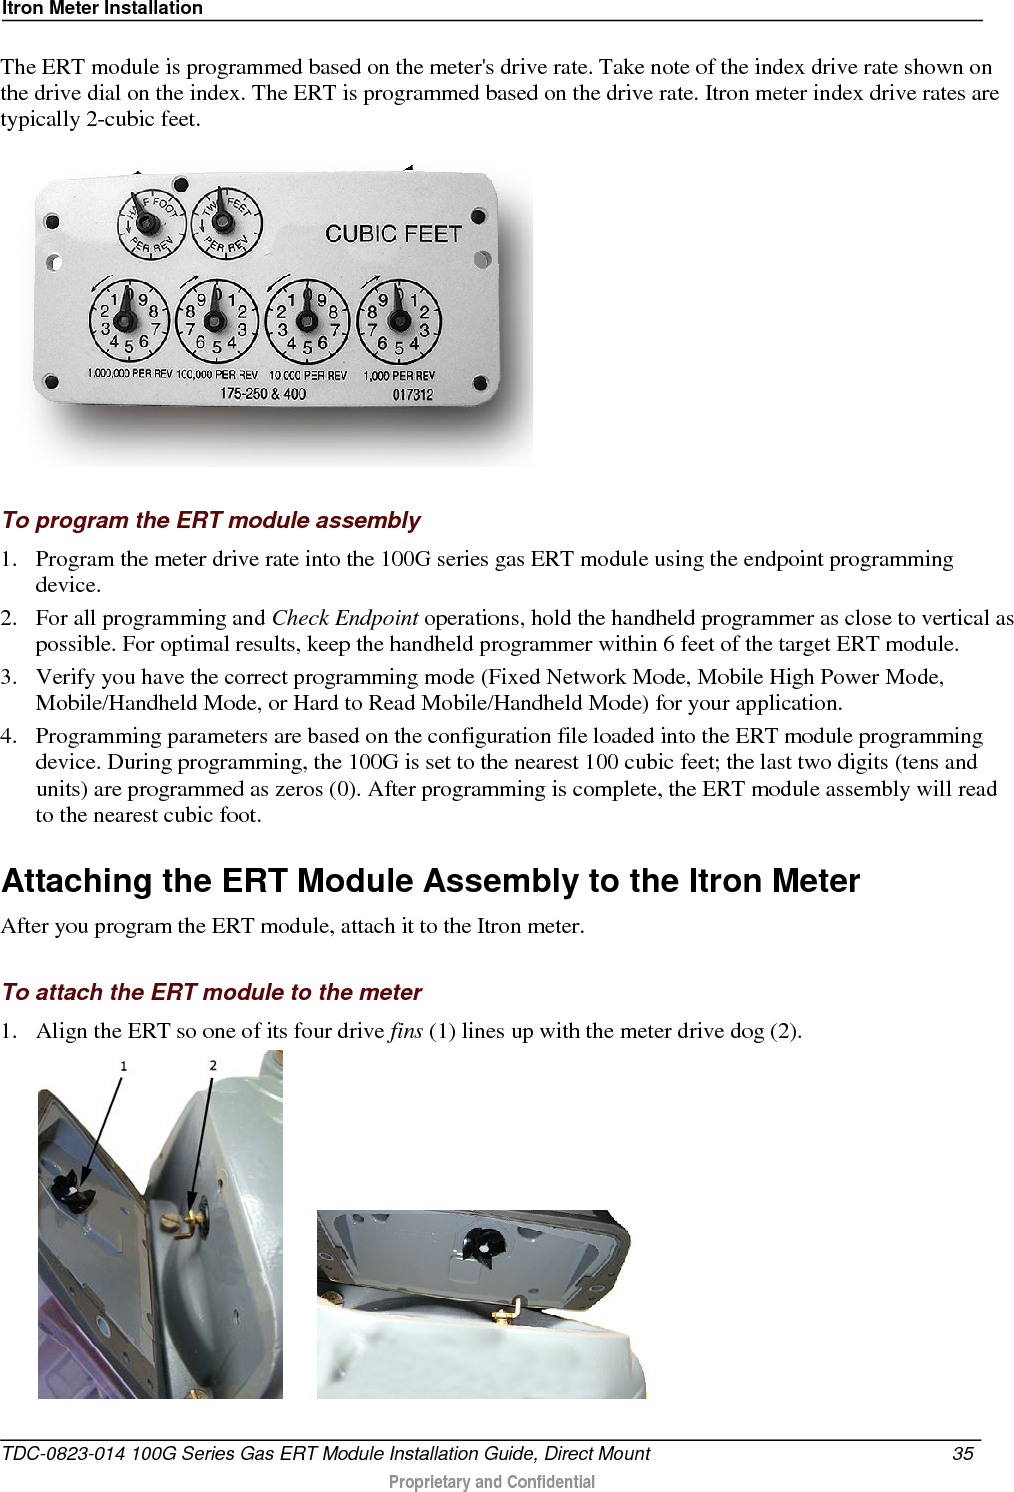 Itron Meter Installation  The ERT module is programmed based on the meter&apos;s drive rate. Take note of the index drive rate shown on the drive dial on the index. The ERT is programmed based on the drive rate. Itron meter index drive rates are typically 2-cubic feet.     To program the ERT module assembly 1. Program the meter drive rate into the 100G series gas ERT module using the endpoint programming device.  2. For all programming and Check Endpoint operations, hold the handheld programmer as close to vertical as possible. For optimal results, keep the handheld programmer within 6 feet of the target ERT module.  3. Verify you have the correct programming mode (Fixed Network Mode, Mobile High Power Mode, Mobile/Handheld Mode, or Hard to Read Mobile/Handheld Mode) for your application.  4. Programming parameters are based on the configuration file loaded into the ERT module programming device. During programming, the 100G is set to the nearest 100 cubic feet; the last two digits (tens and units) are programmed as zeros (0). After programming is complete, the ERT module assembly will read to the nearest cubic foot.   Attaching the ERT Module Assembly to the Itron Meter After you program the ERT module, attach it to the Itron meter.   To attach the ERT module to the meter 1. Align the ERT so one of its four drive fins (1) lines up with the meter drive dog (2).          TDC-0823-014 100G Series Gas ERT Module Installation Guide, Direct Mount 35   Proprietary and Confidential  